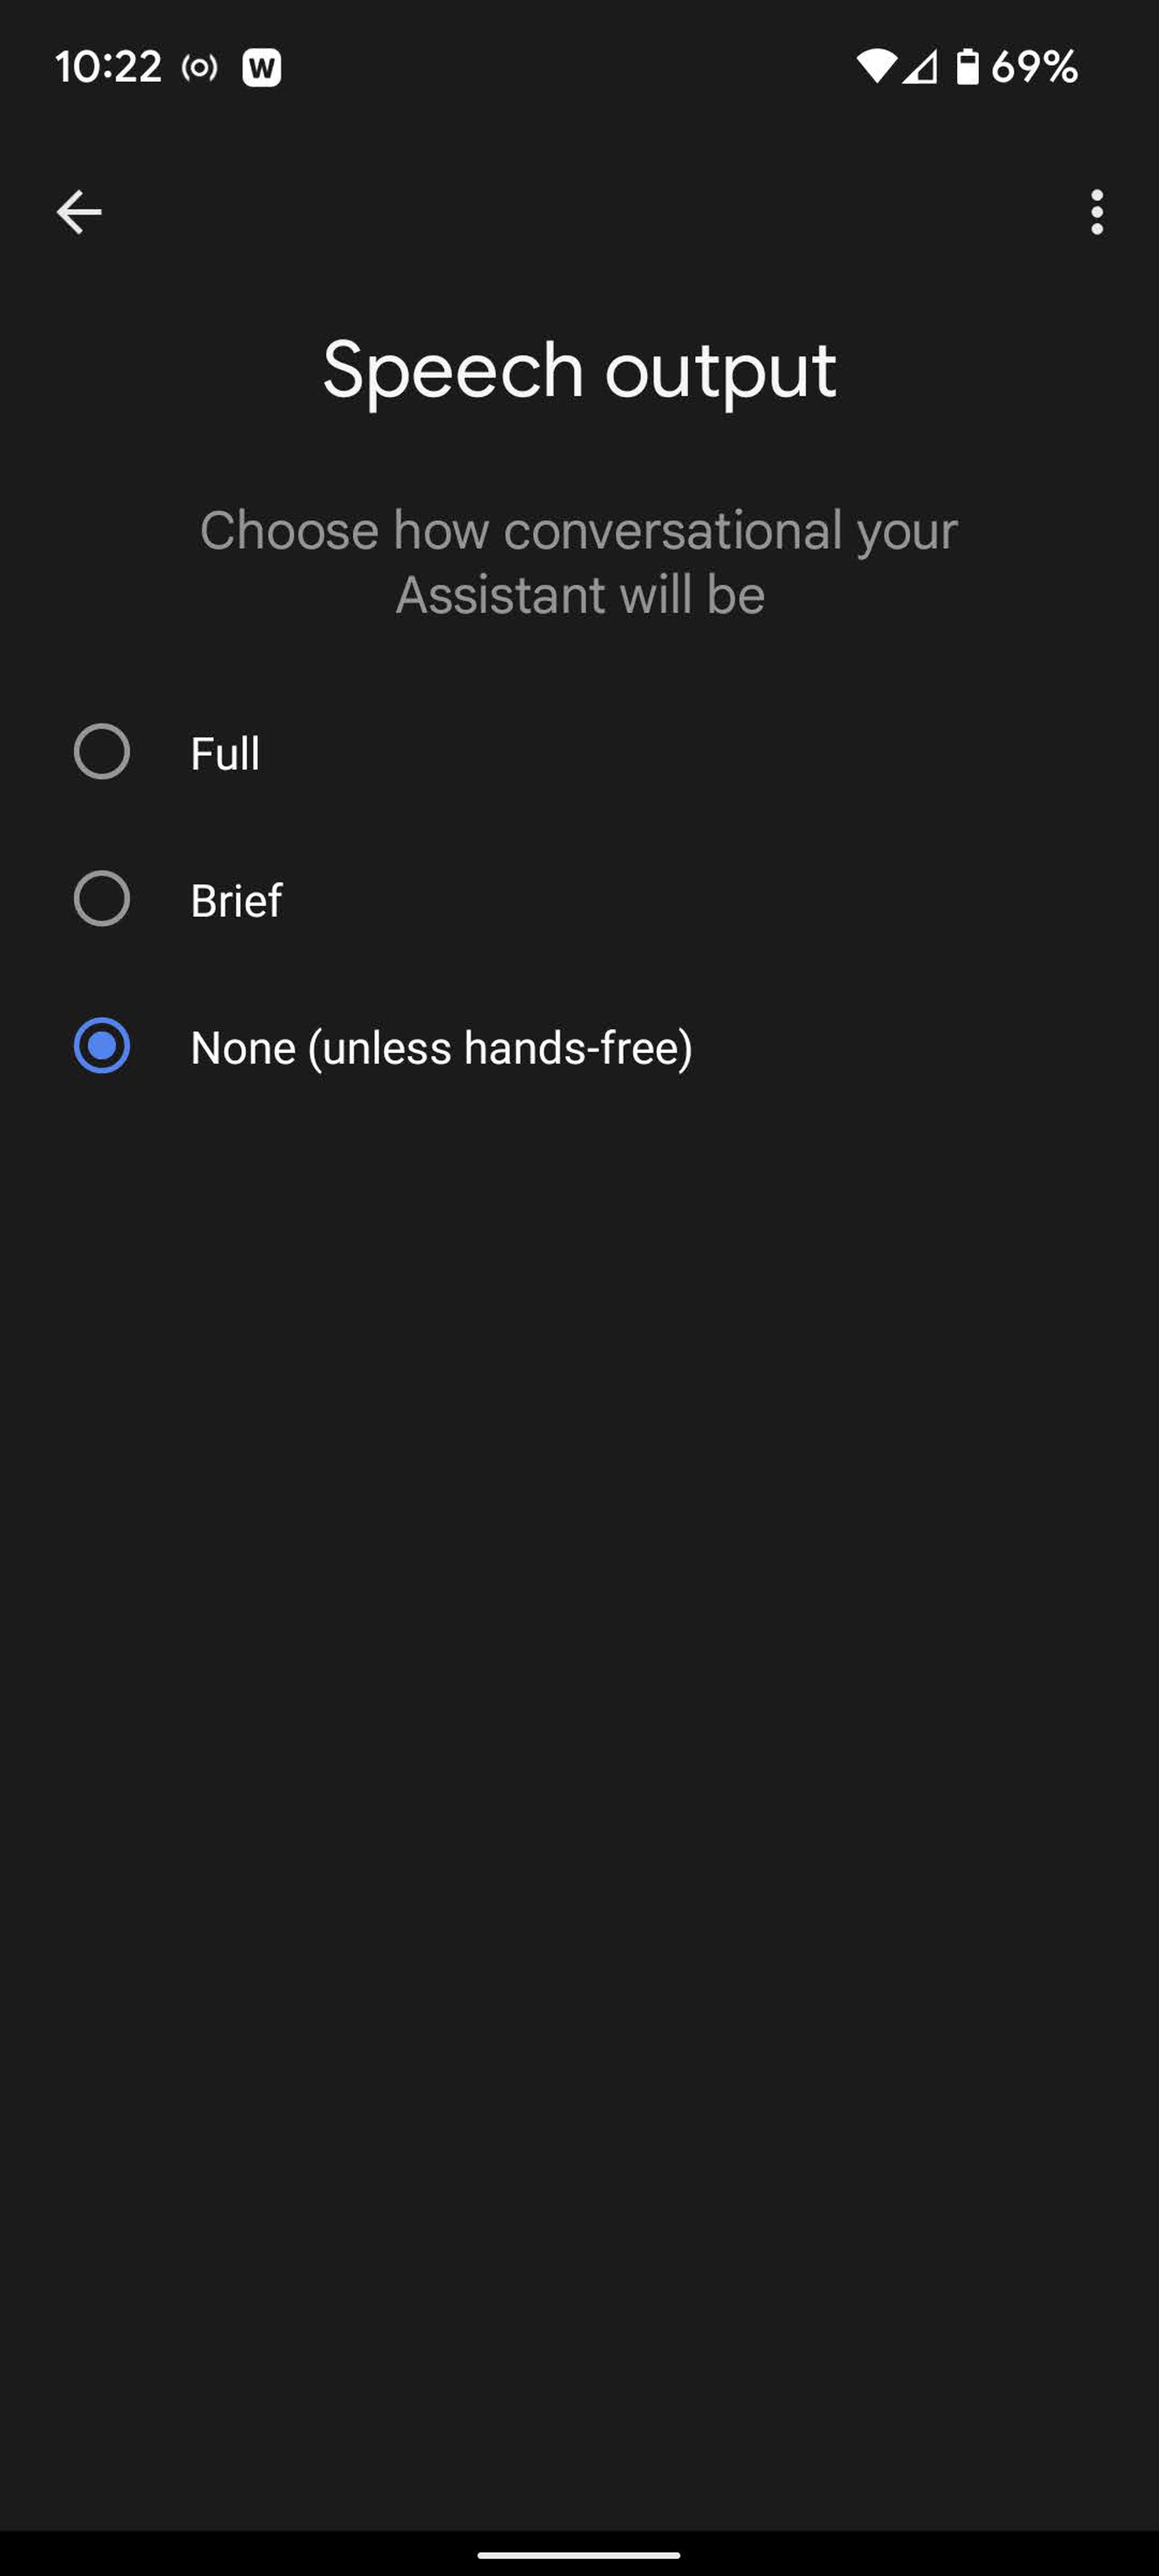 Select None and you’ll silence your Assistant (unless you’re in hands-free mode)